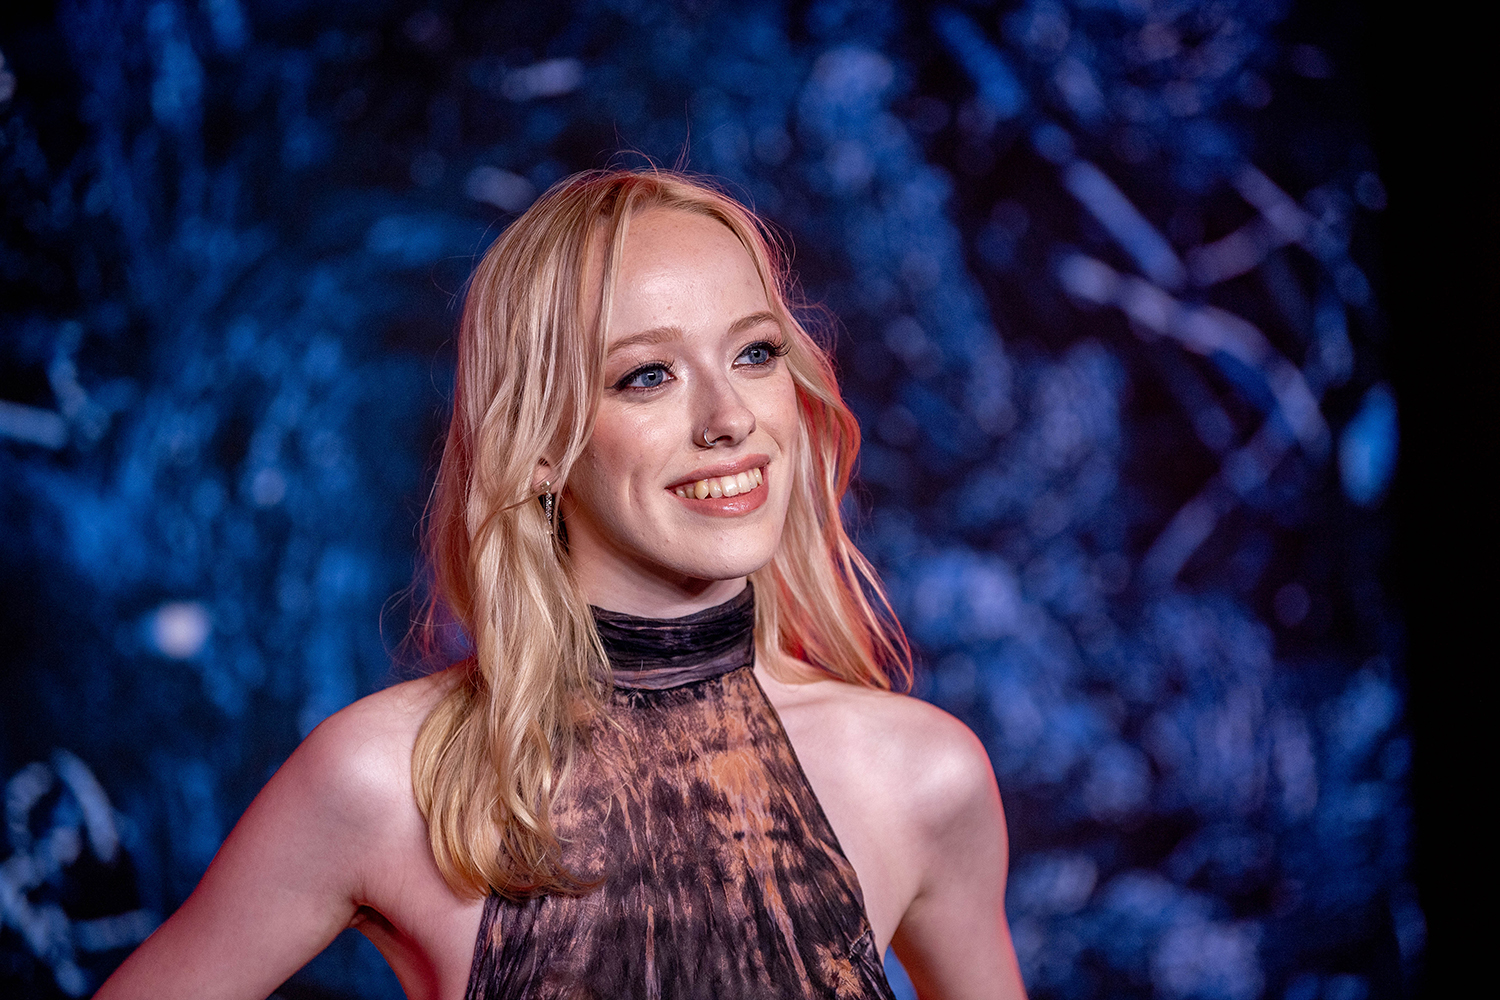 Amybeth Mcnulty, who plays Vickie, at the Stranger things 4 premiere in New York